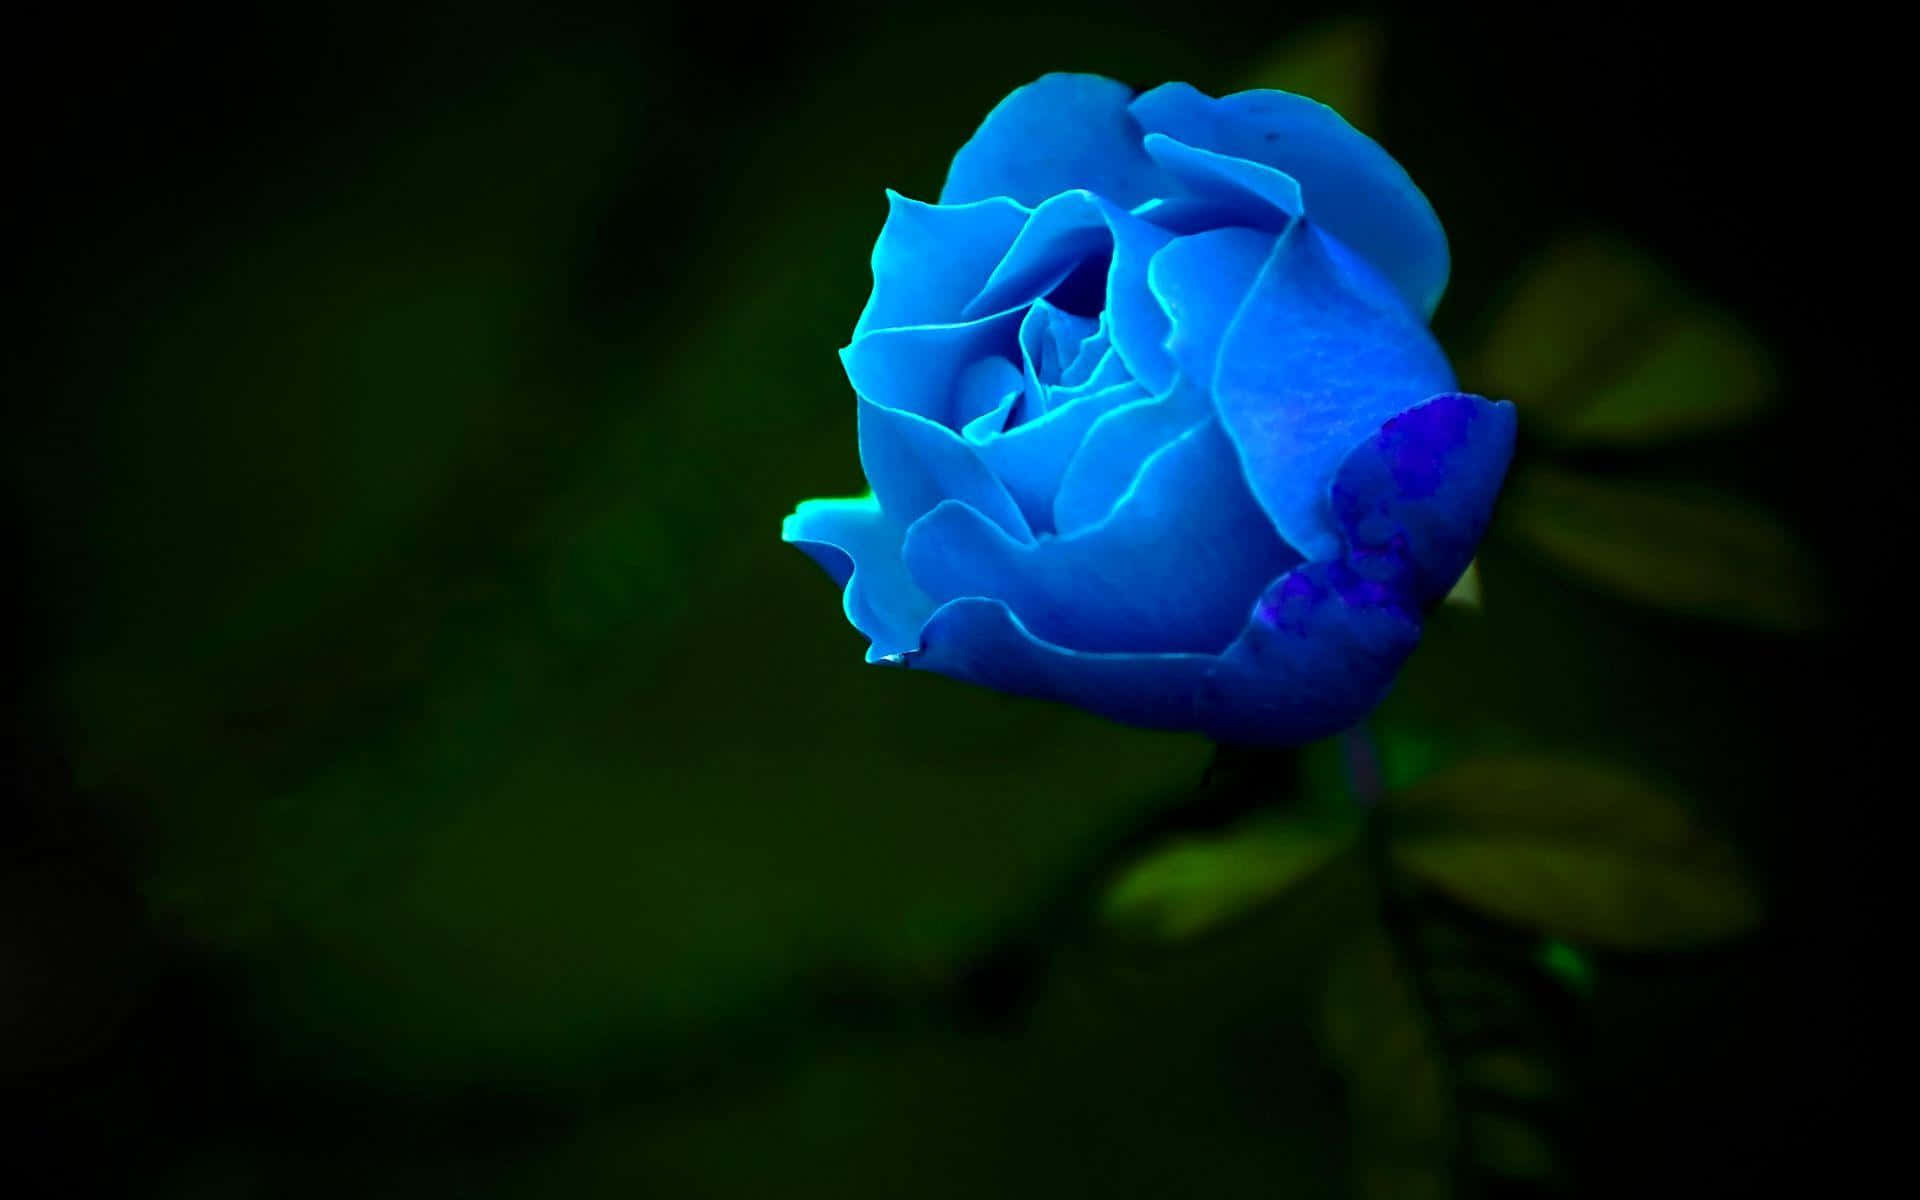 A Blue Rose Is Shown In The Dark Background